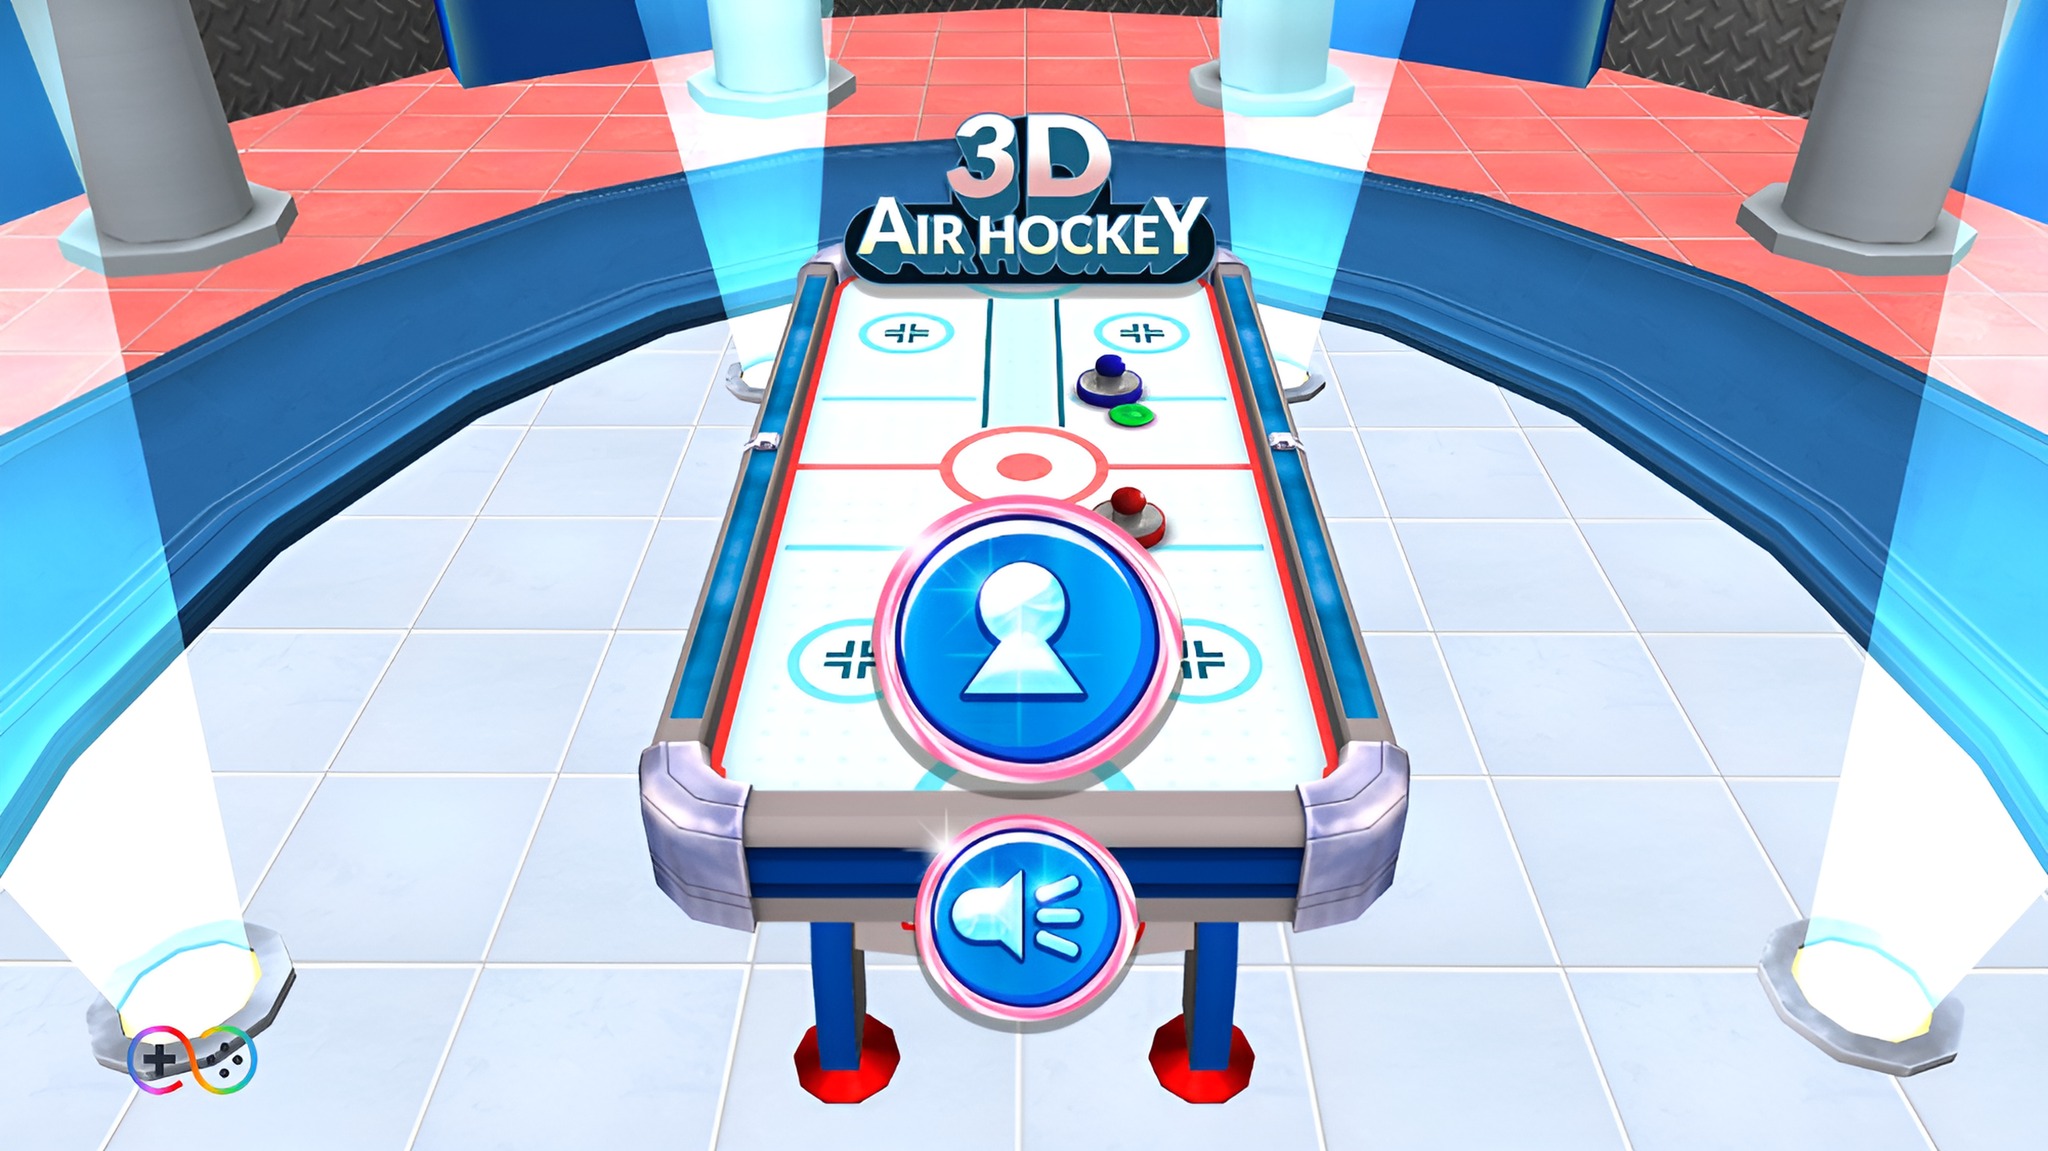 3D Air Hockey – Play Free Online Sports Game